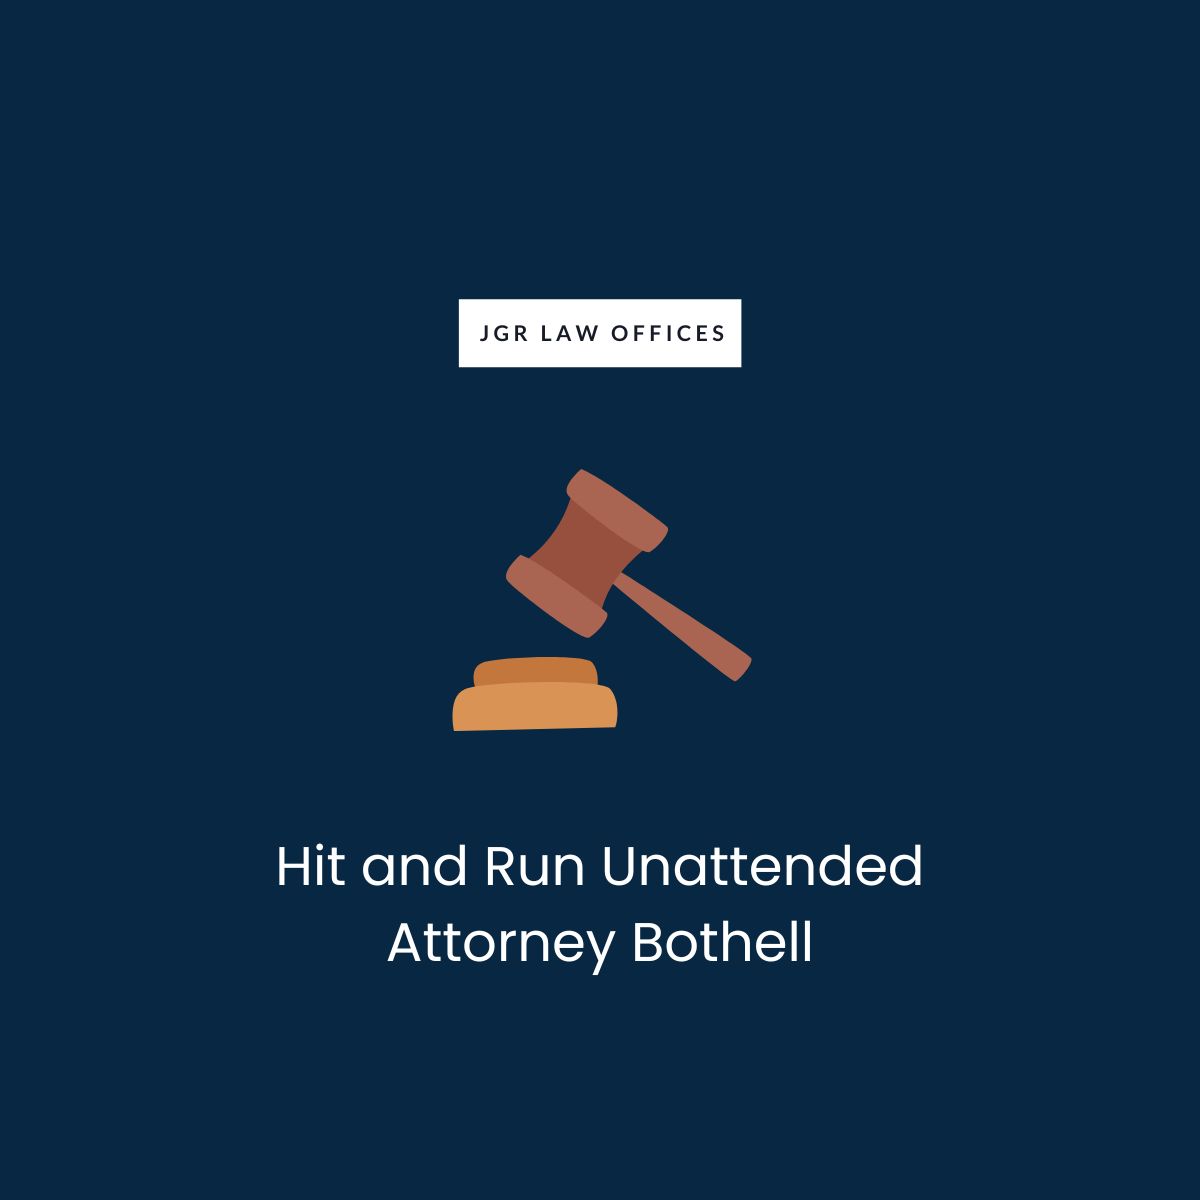 Hit and Run Unattended Attorney Bothell